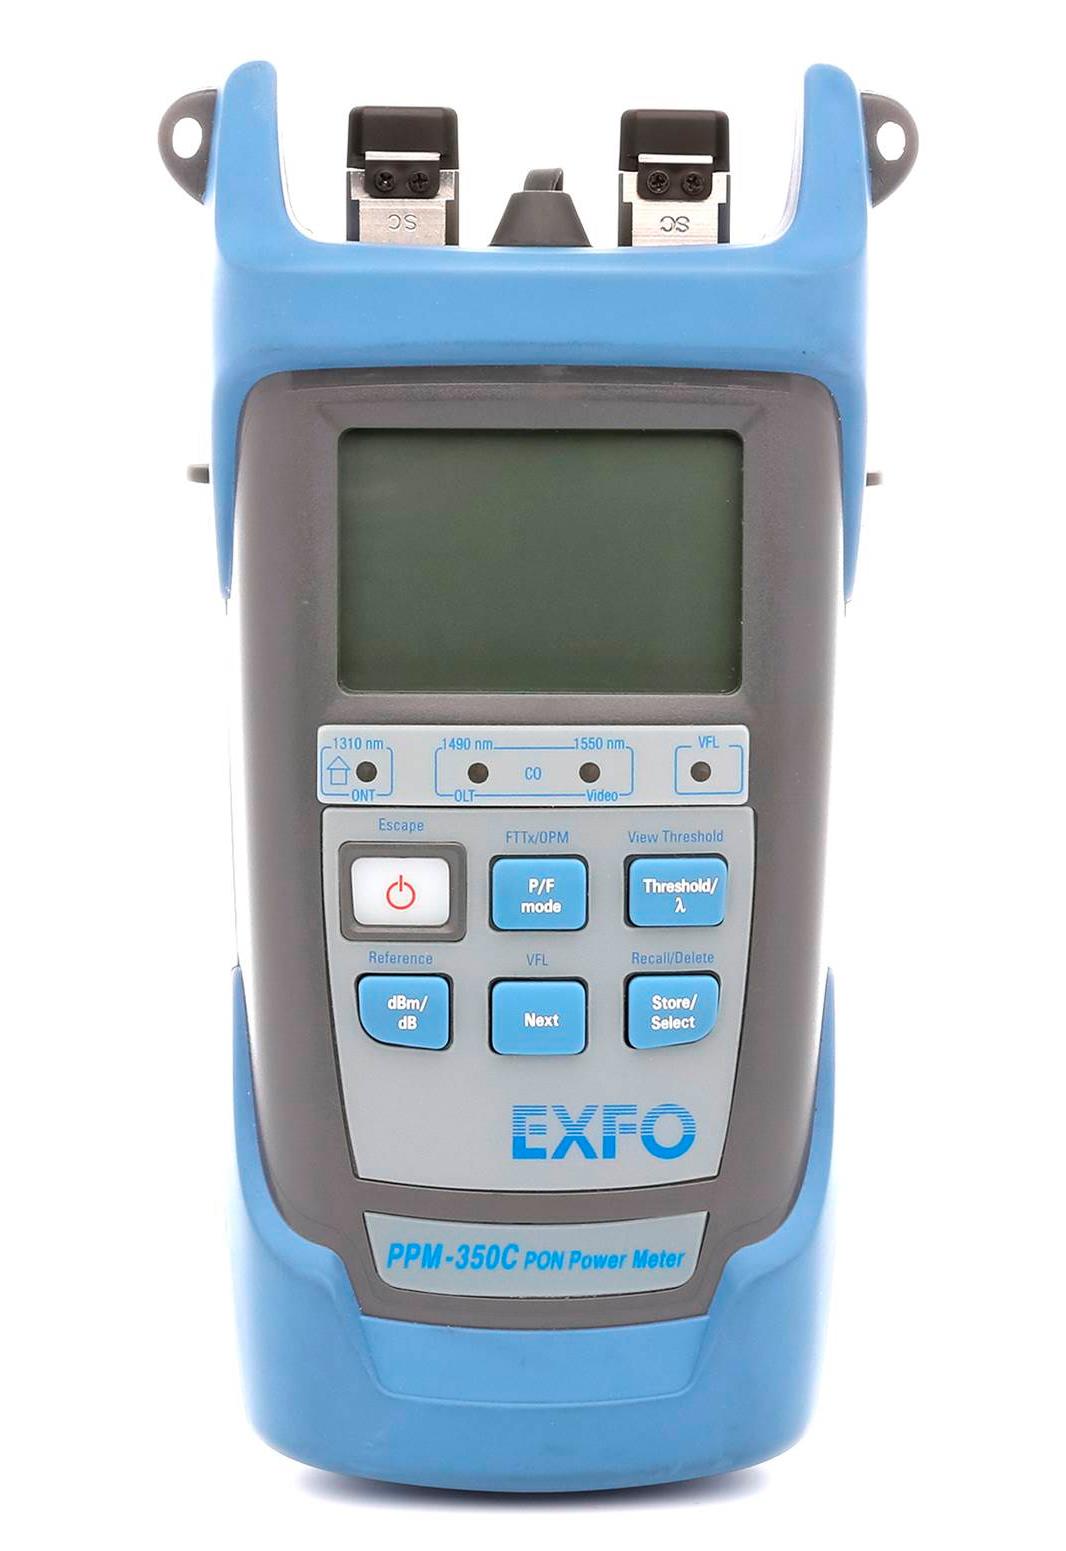 Similar product is EXFO PPM-352C-EA